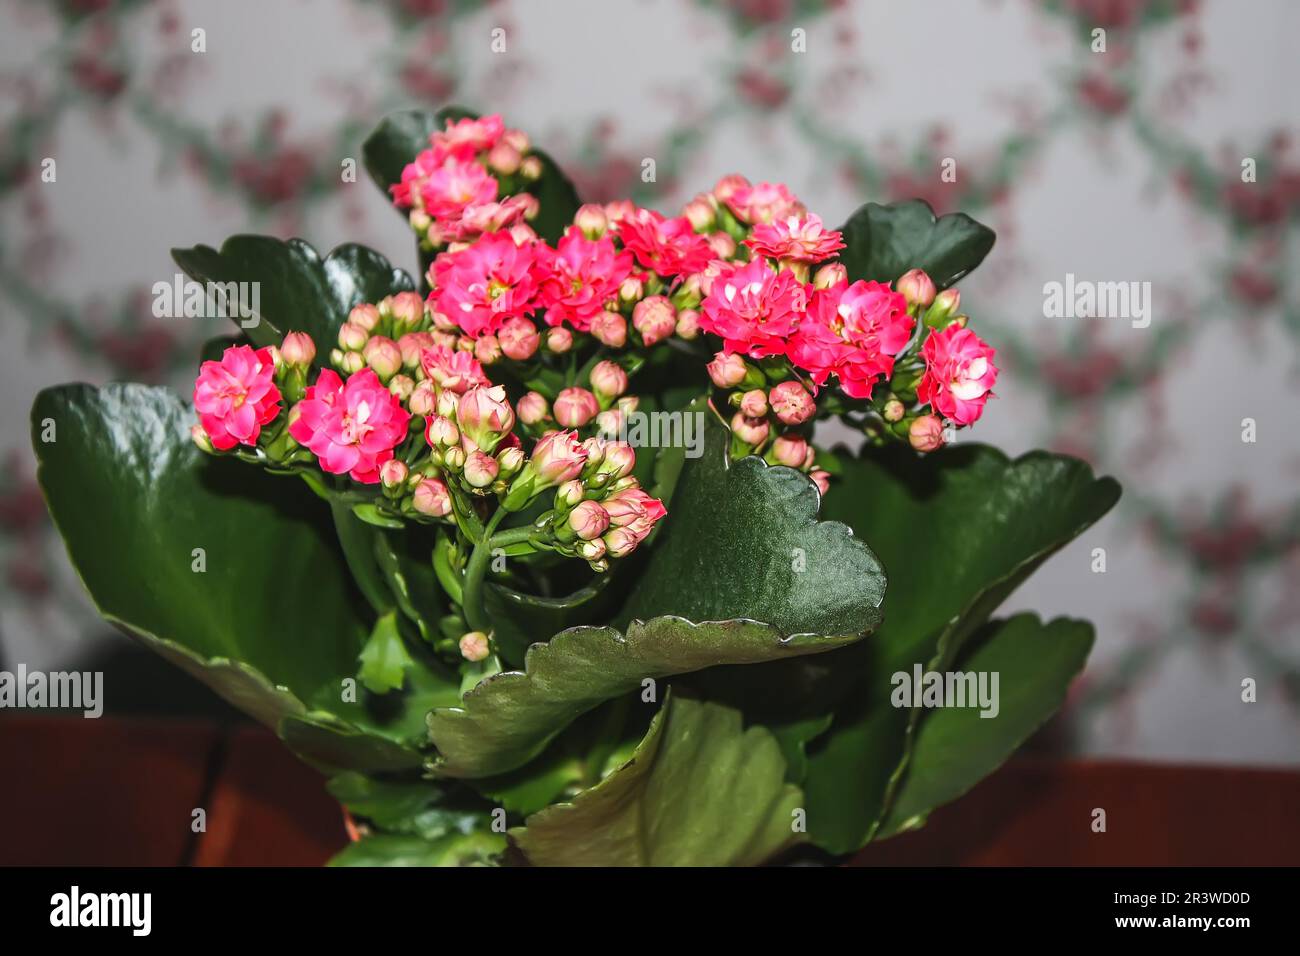 Chalanchoe Calandiva plant in bloom. House plants in floral pot Stock Photo